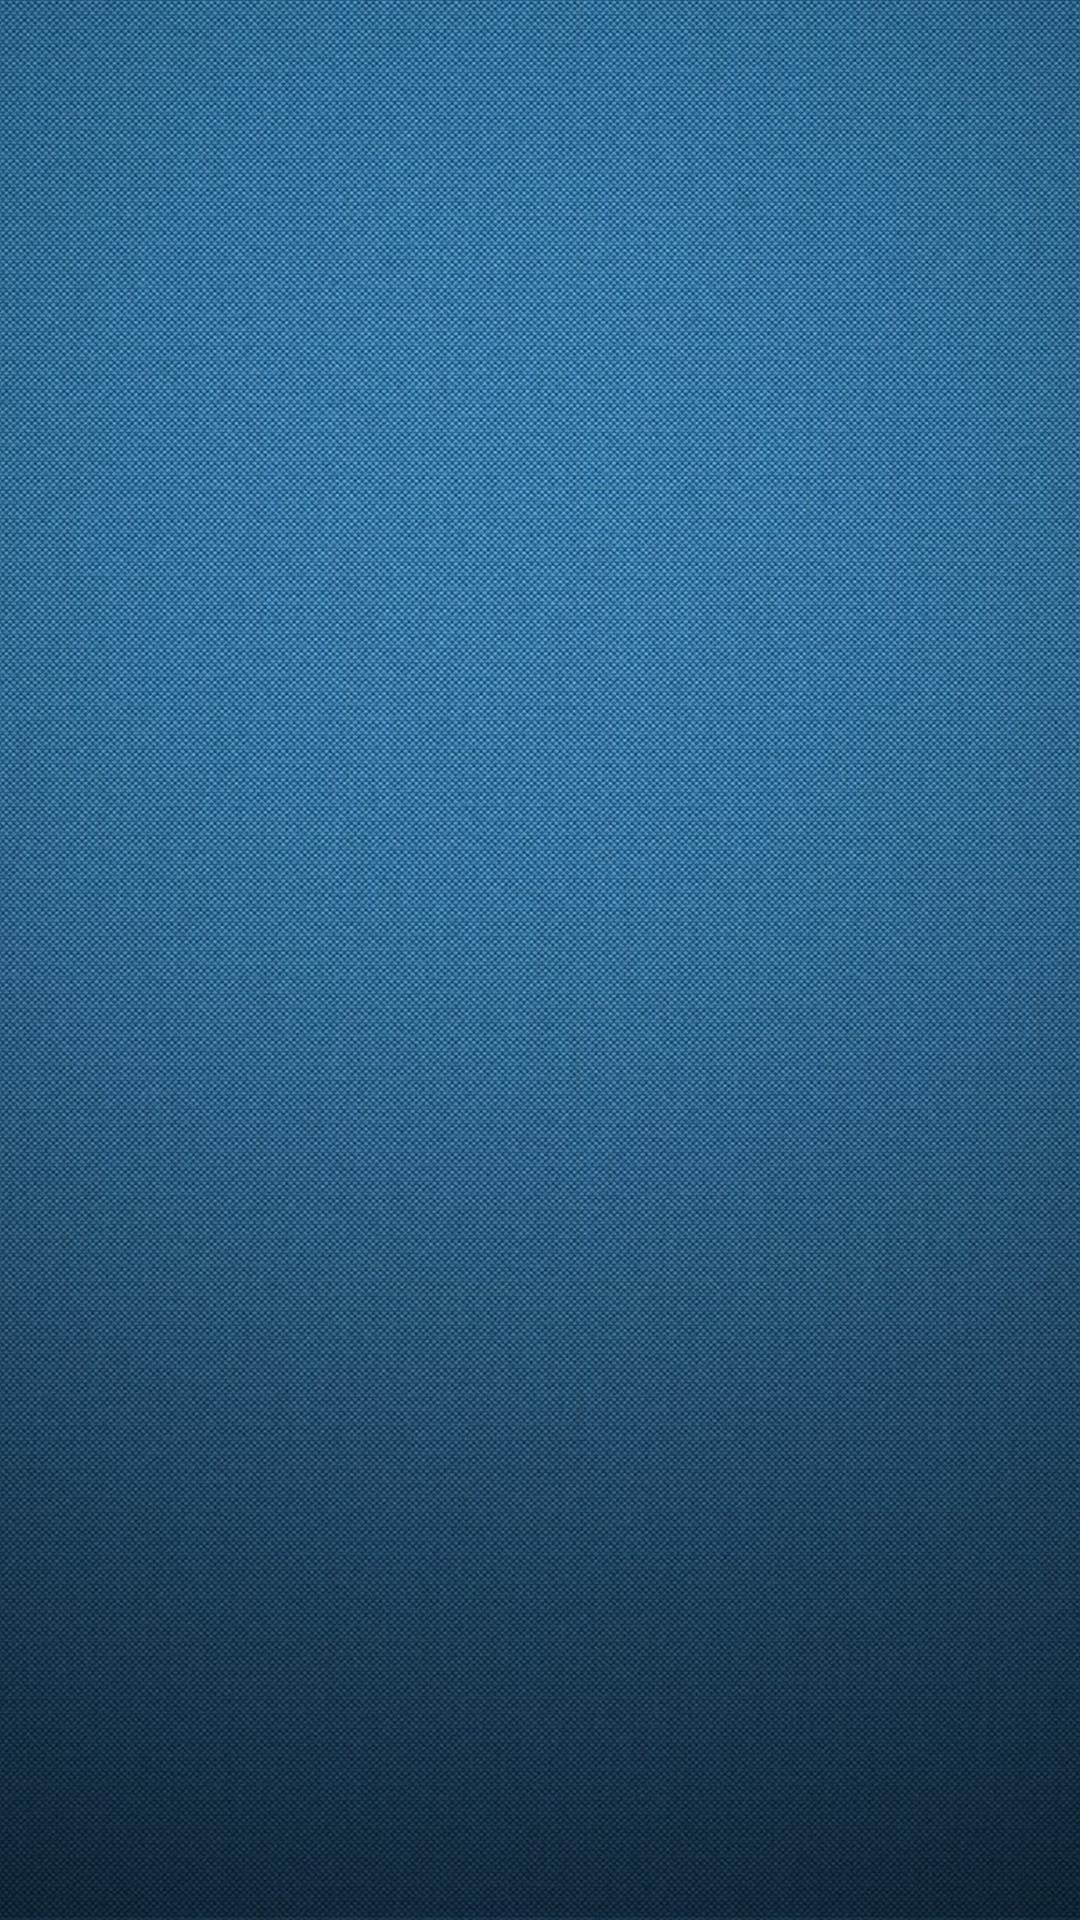 Solid Color iPhone Wallpapers - Wallpaper Cave